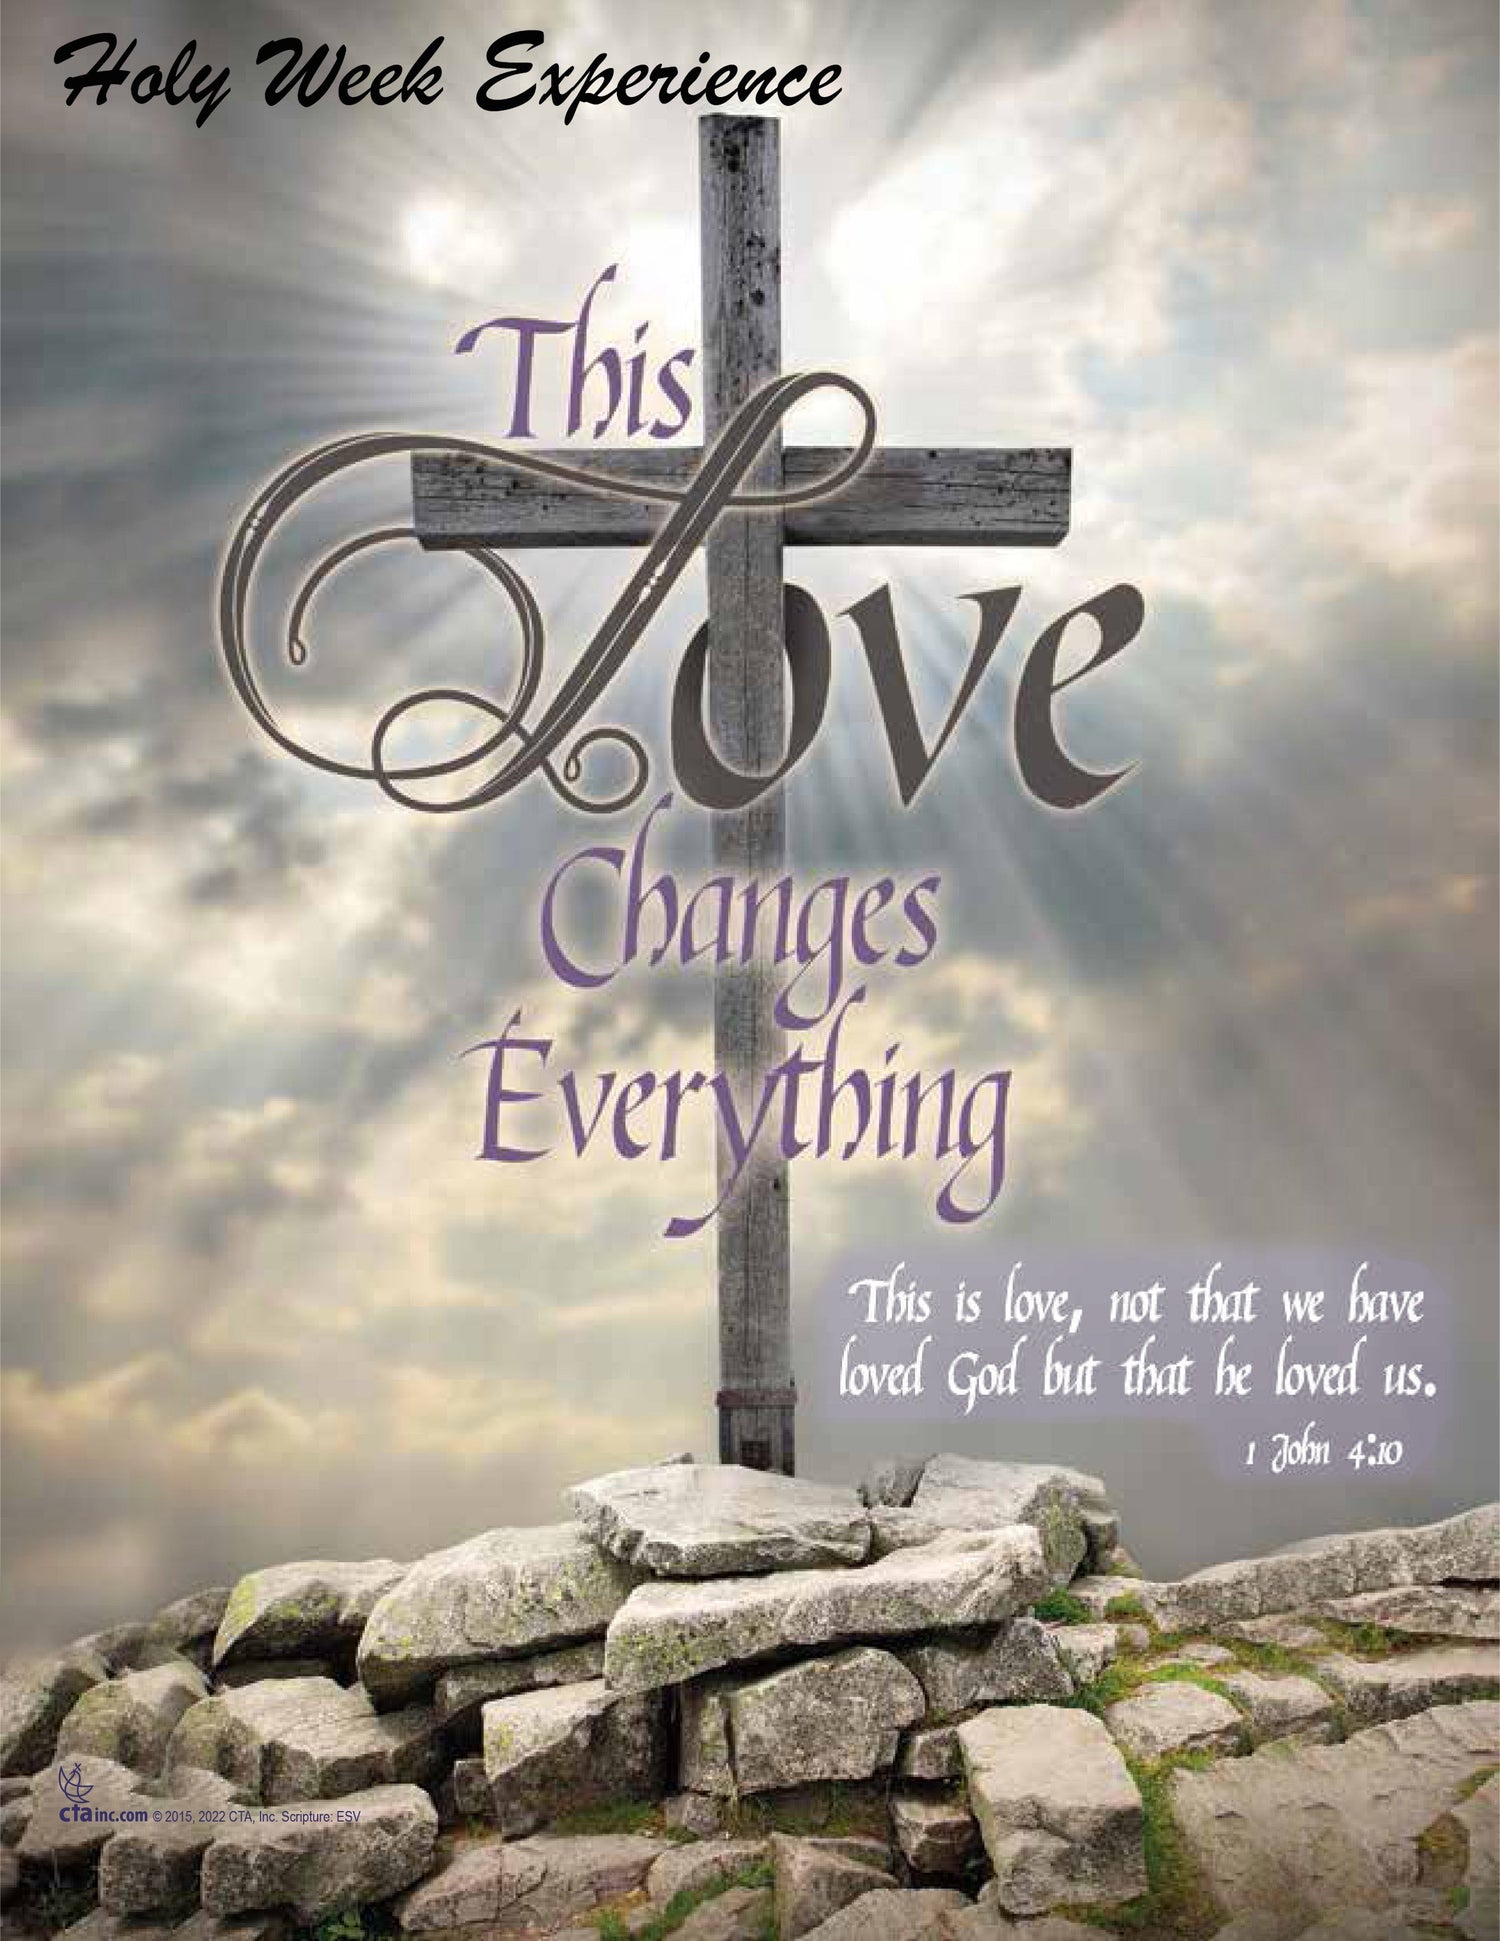 Holy Week Experience Resource Pack - This Love Changes Everything